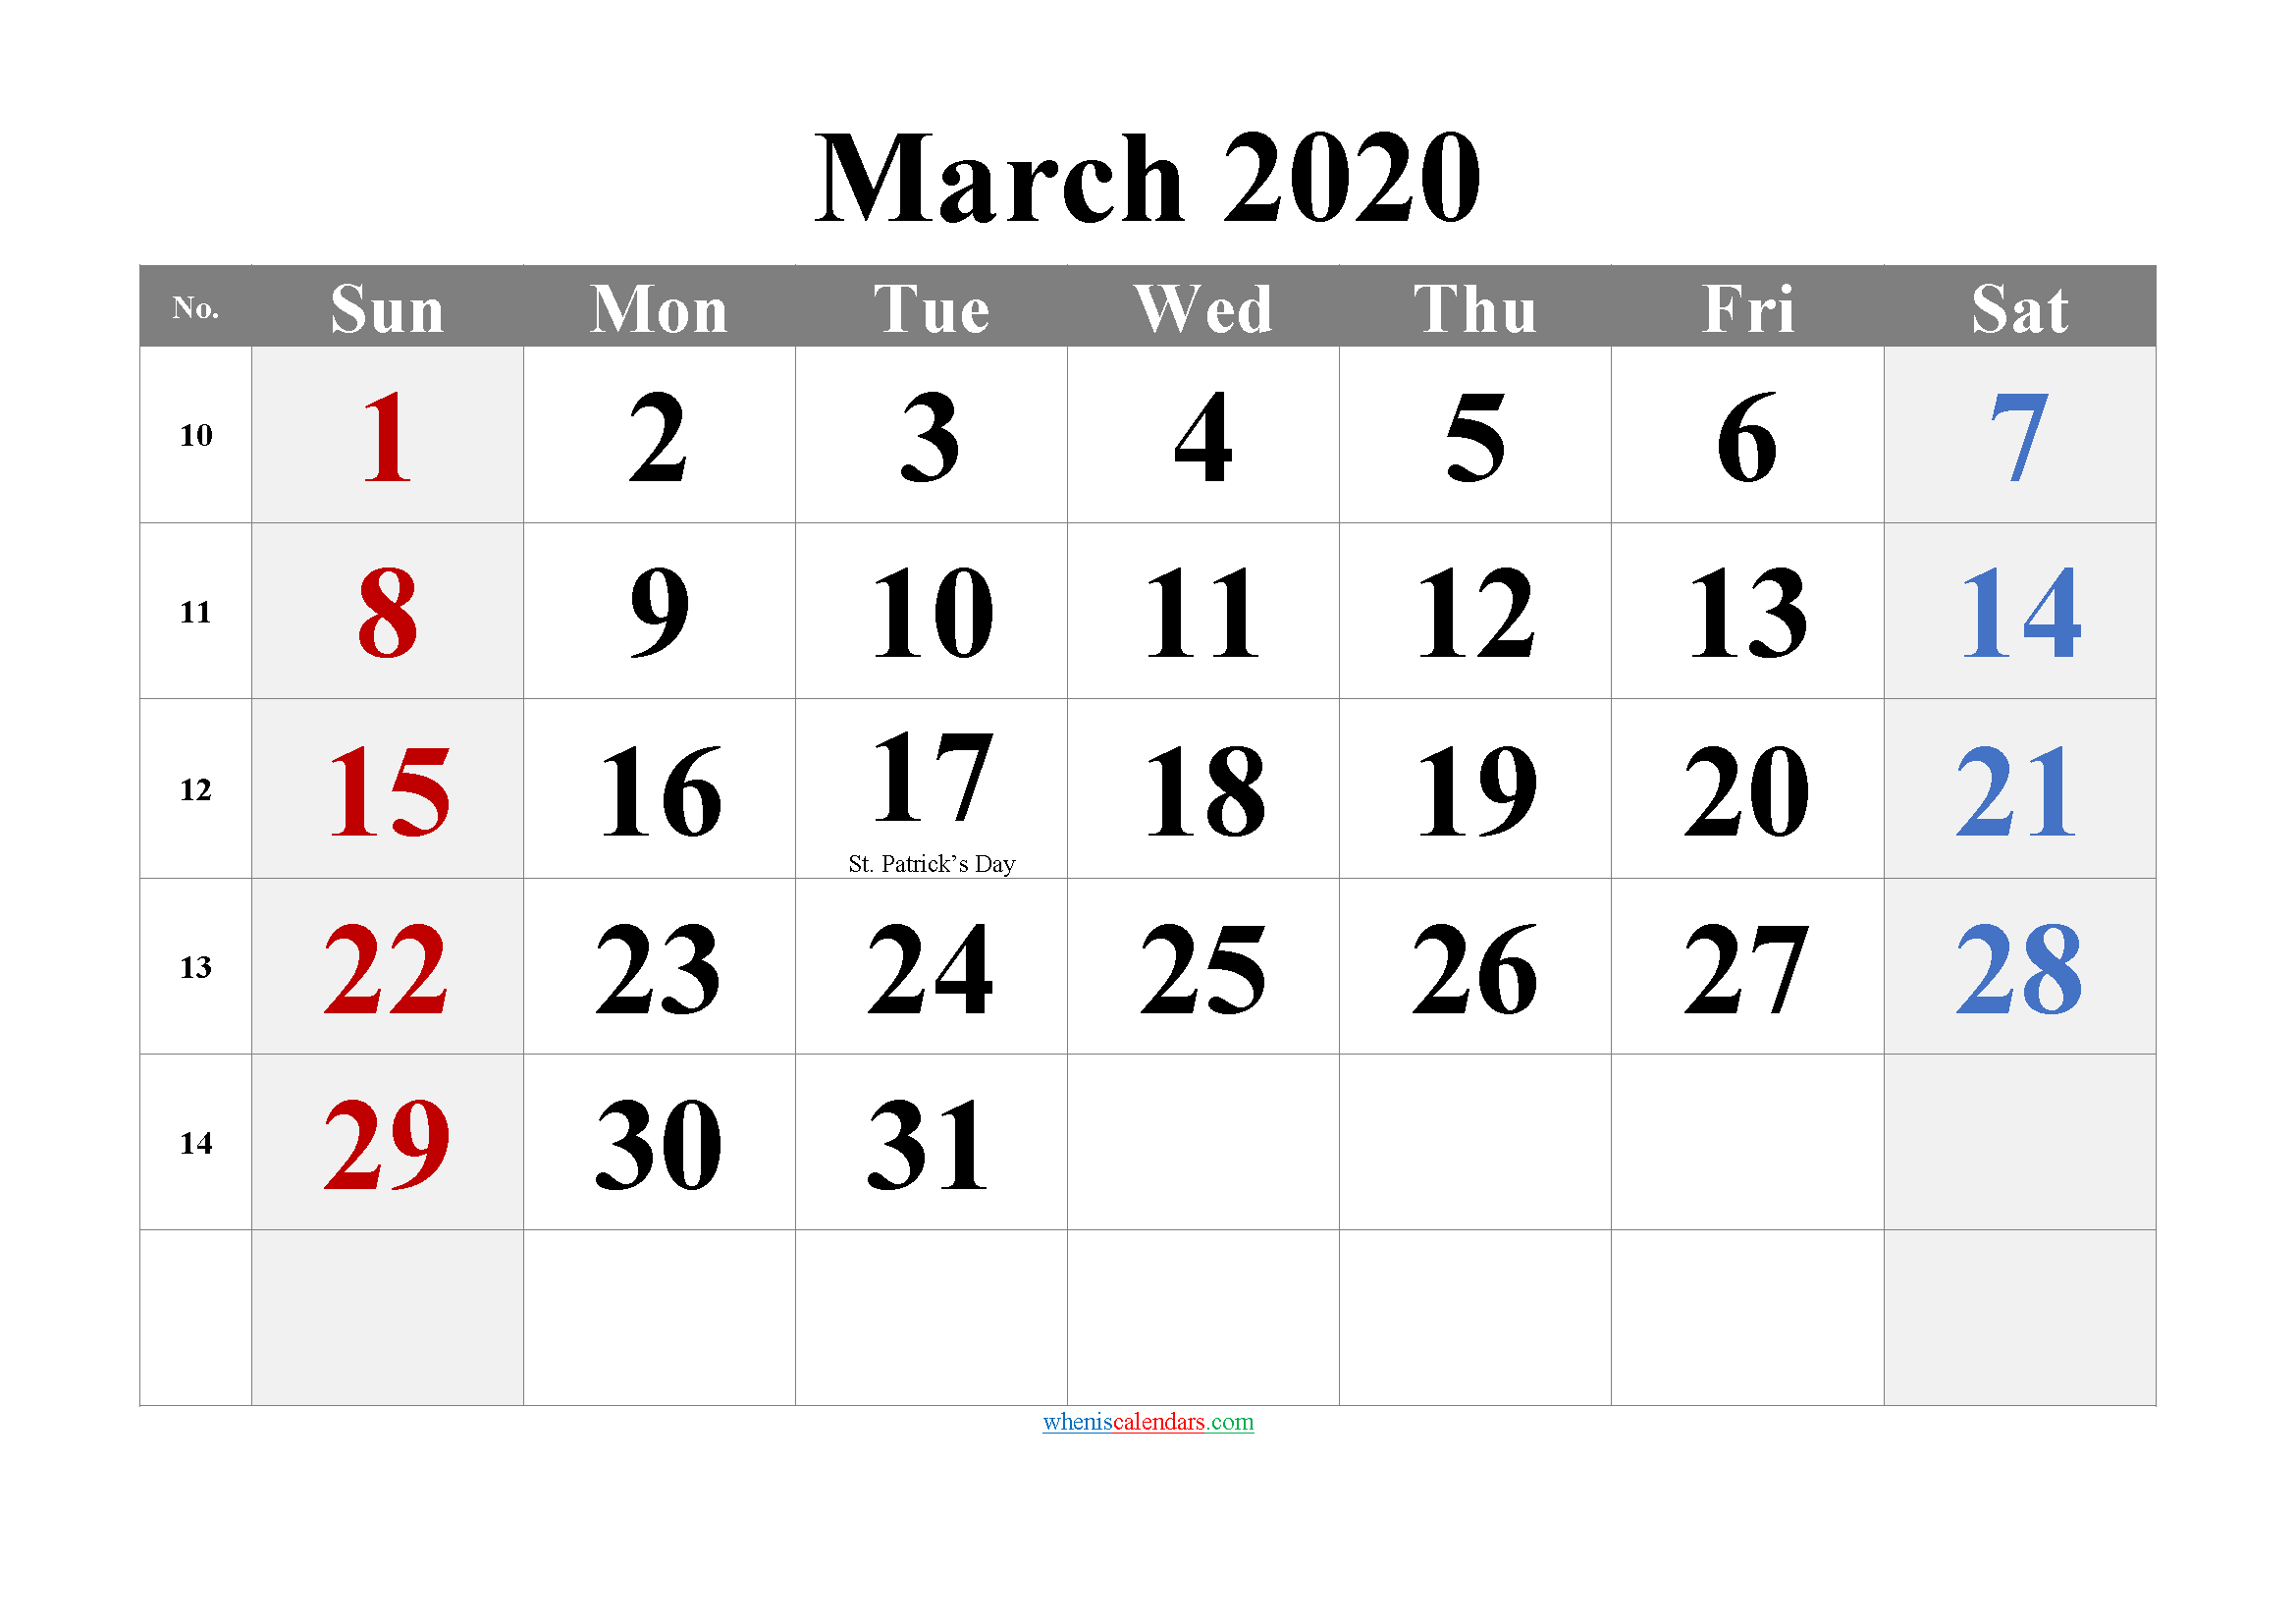 MARCH 2020 Printable Calendar with Holidays